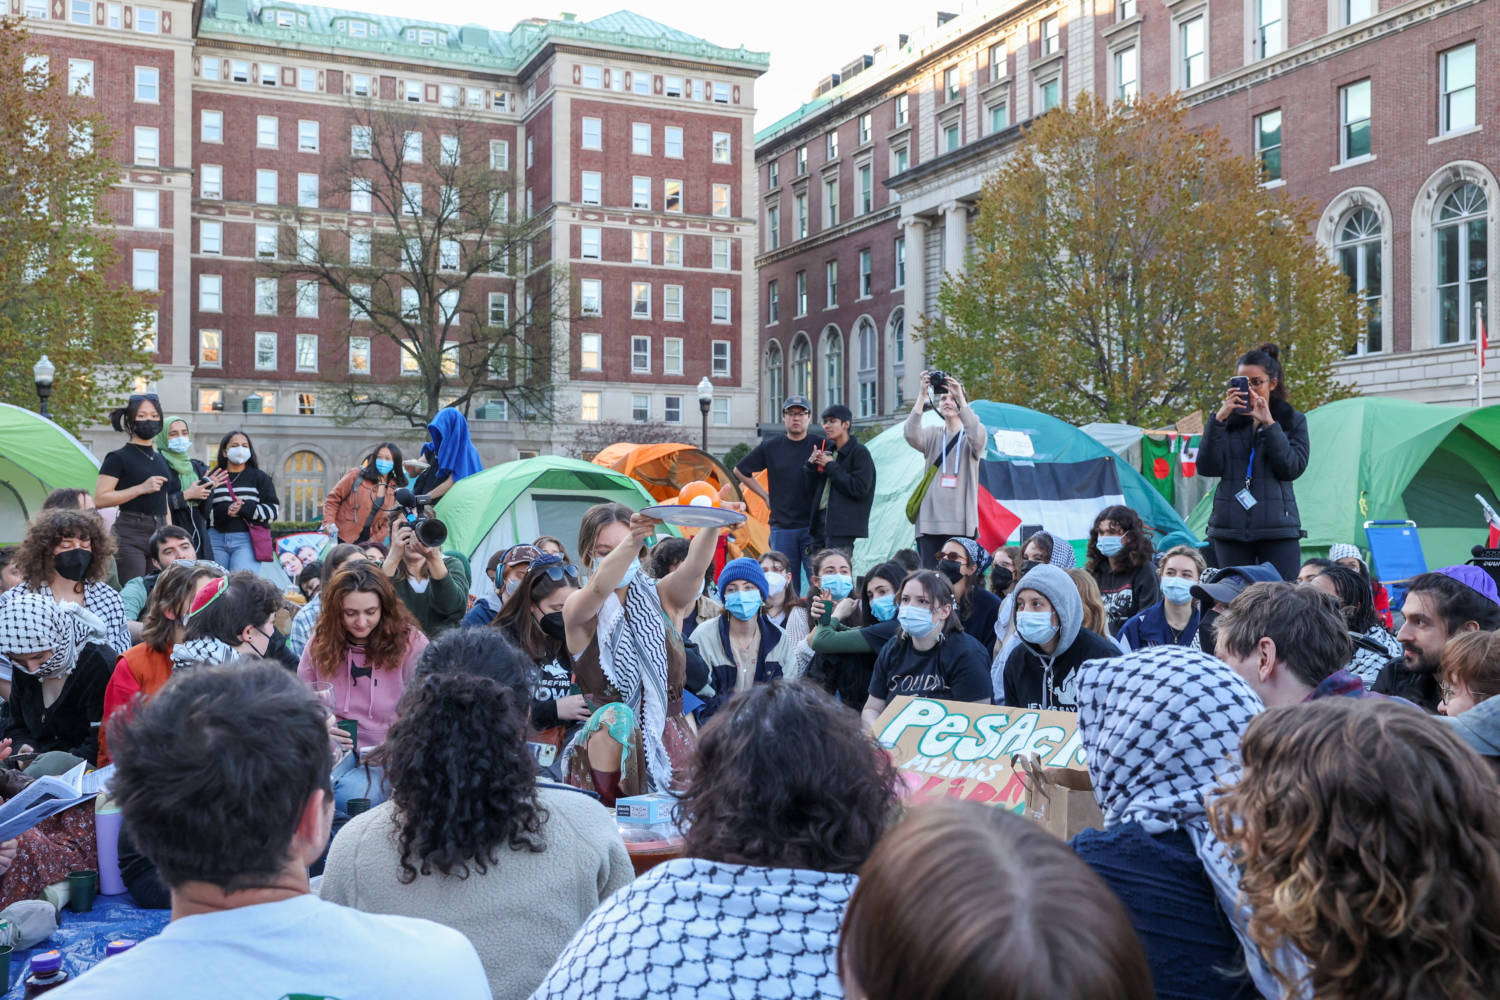 Protests Continue At Columbia University In New York During The Ongoing Conflict Between Israel And The Palestinian Islamist Group Hamas